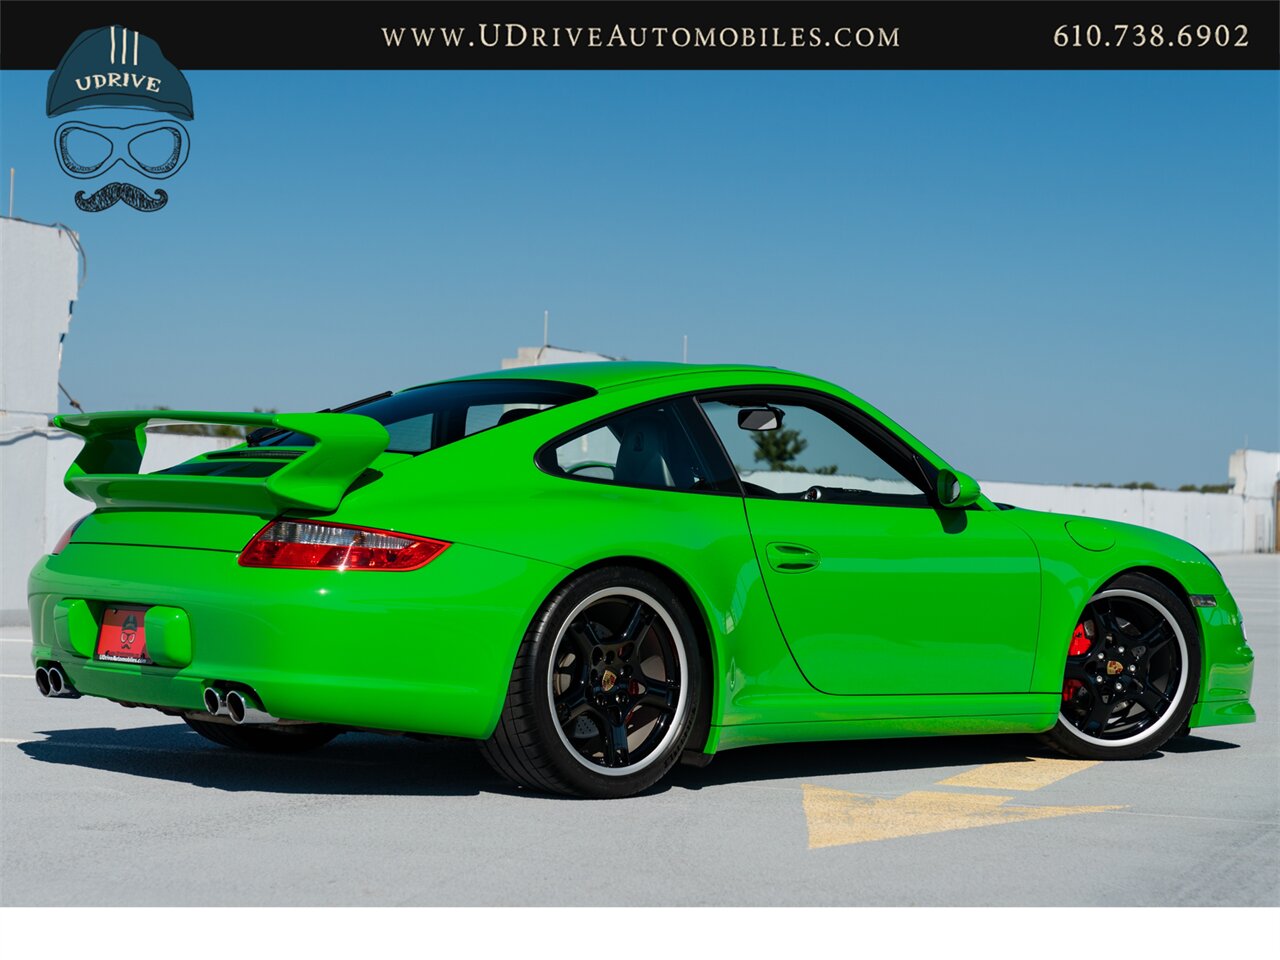 2006 Porsche 911 Carrera 4S  997 PTS Signal Green 6Sp Sport Sts Spt Chrono Spt Exhst - Photo 3 - West Chester, PA 19382